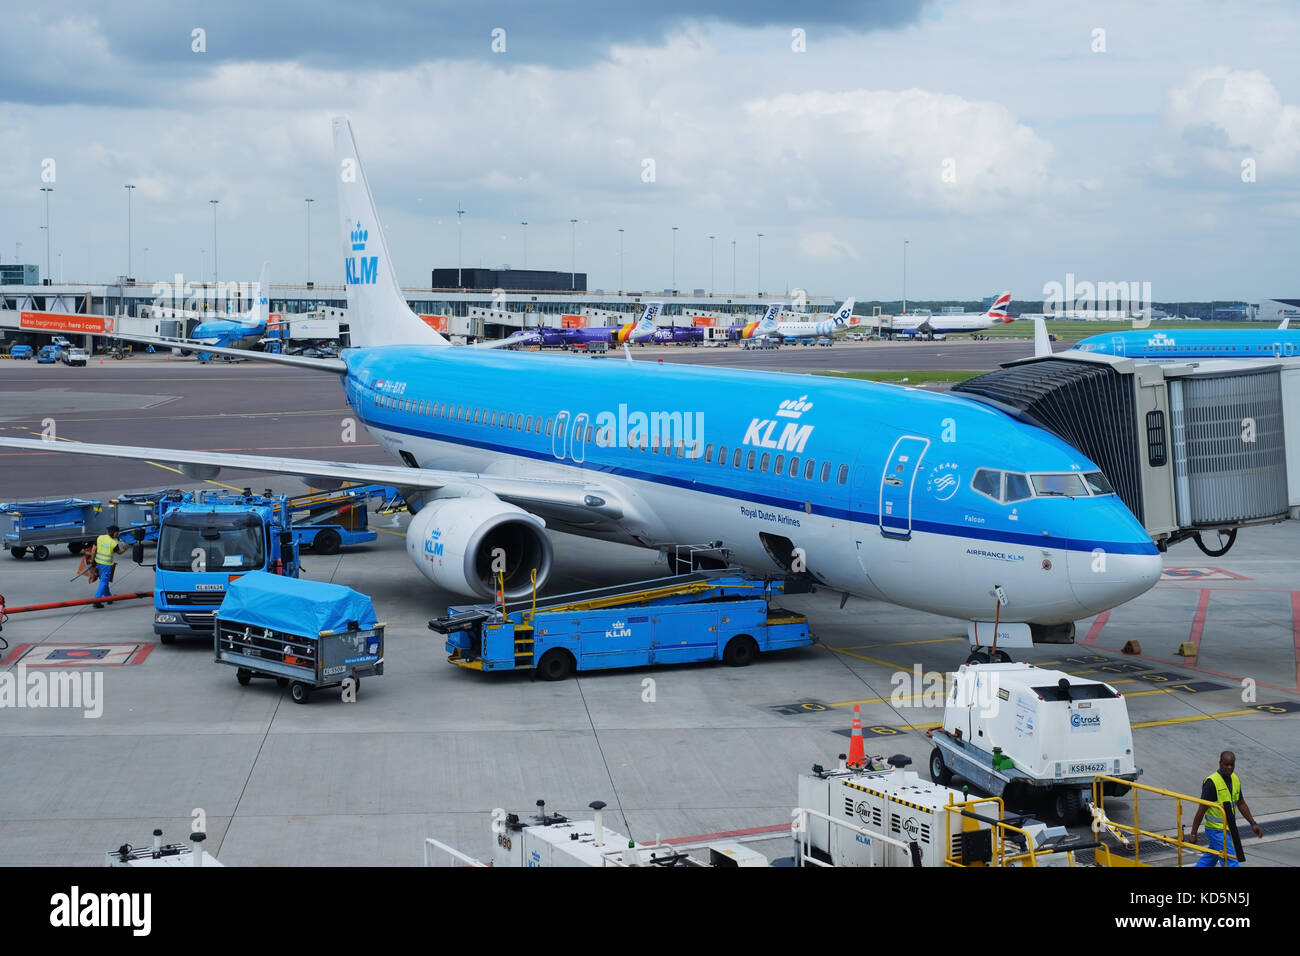 AMSTERDAM, HOLLAND - July 27: KLM plane being loaded at Schiphol Airport on July 27 2017 in Amsterdam, Netherlands. Stock Photo